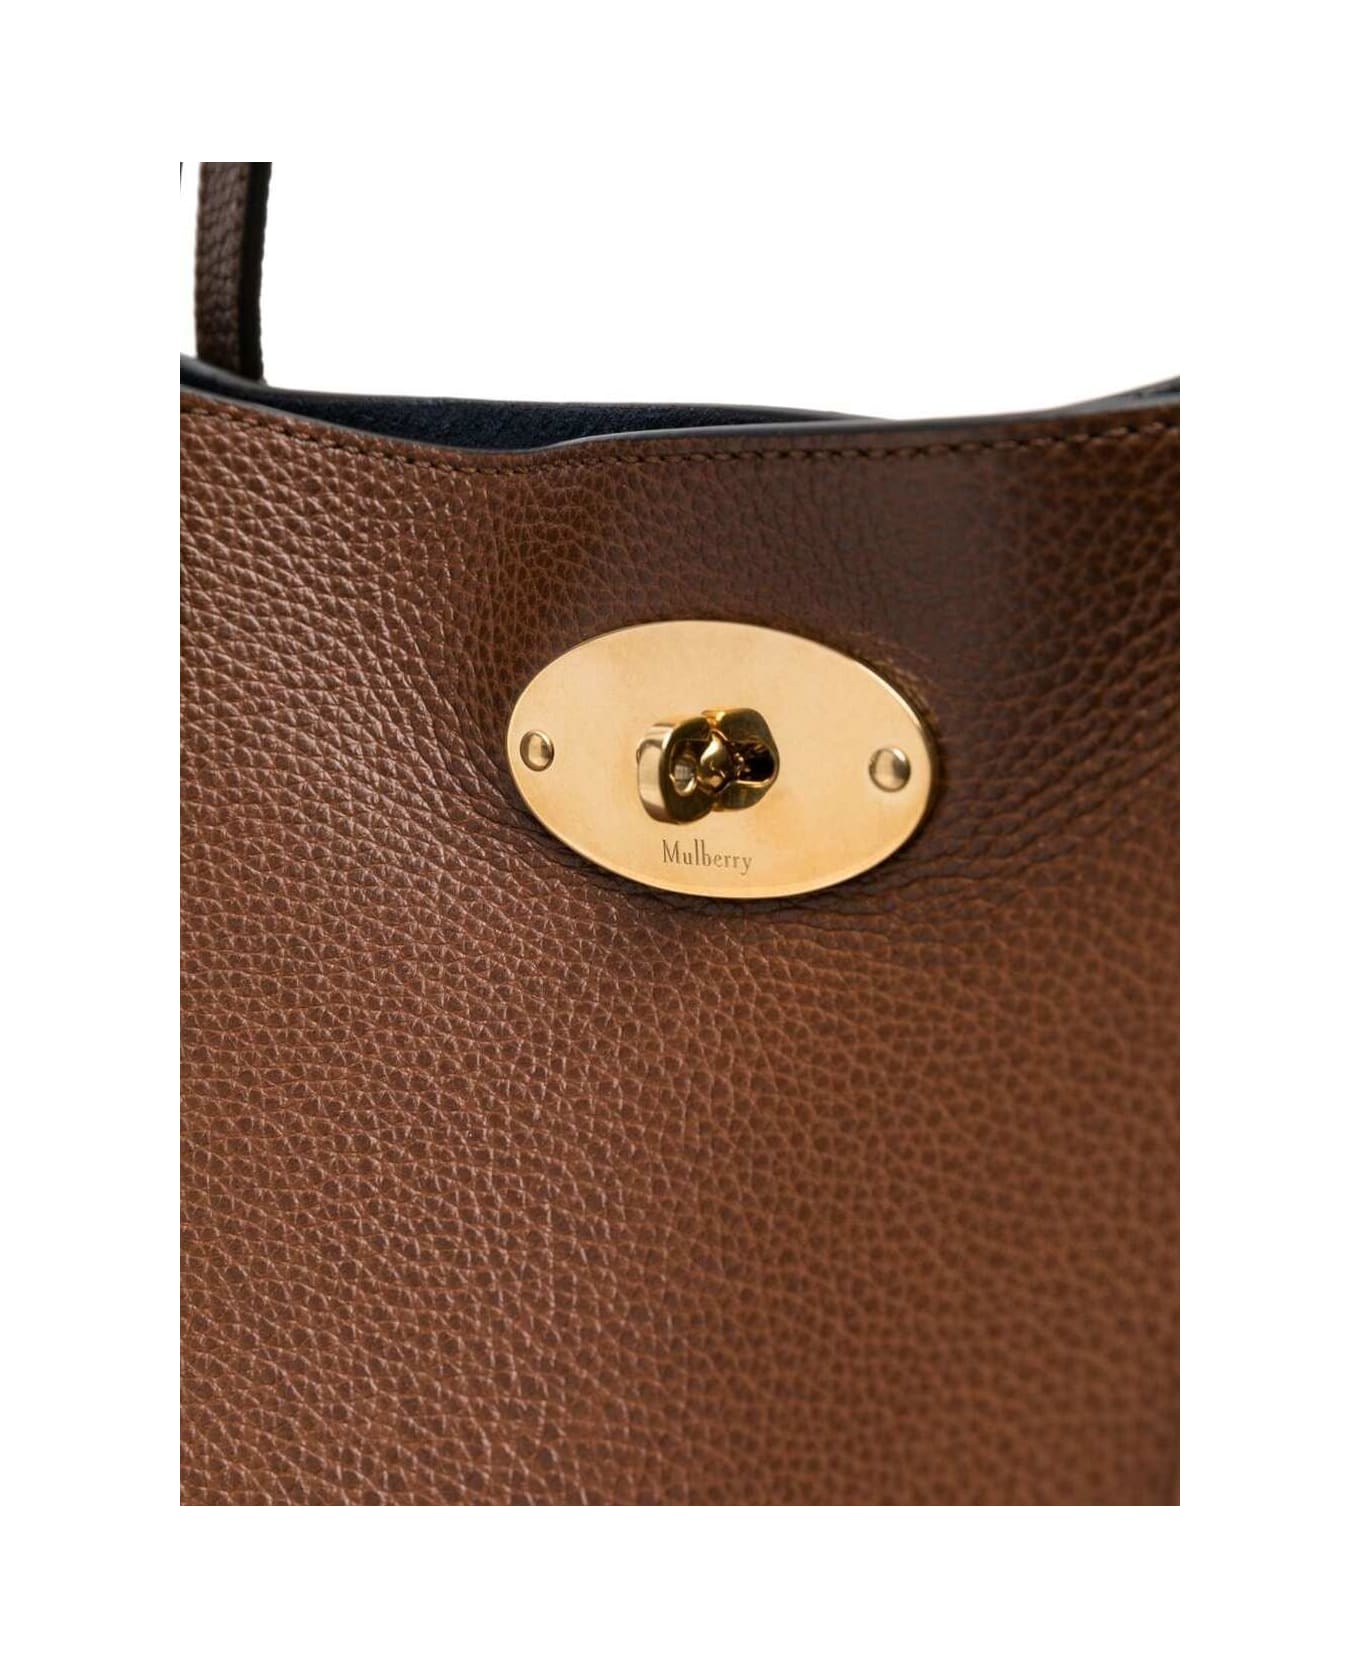 Mulberry Brown 'bayswater' Hand Bag With Flap Detail In Leather Woman - Brown